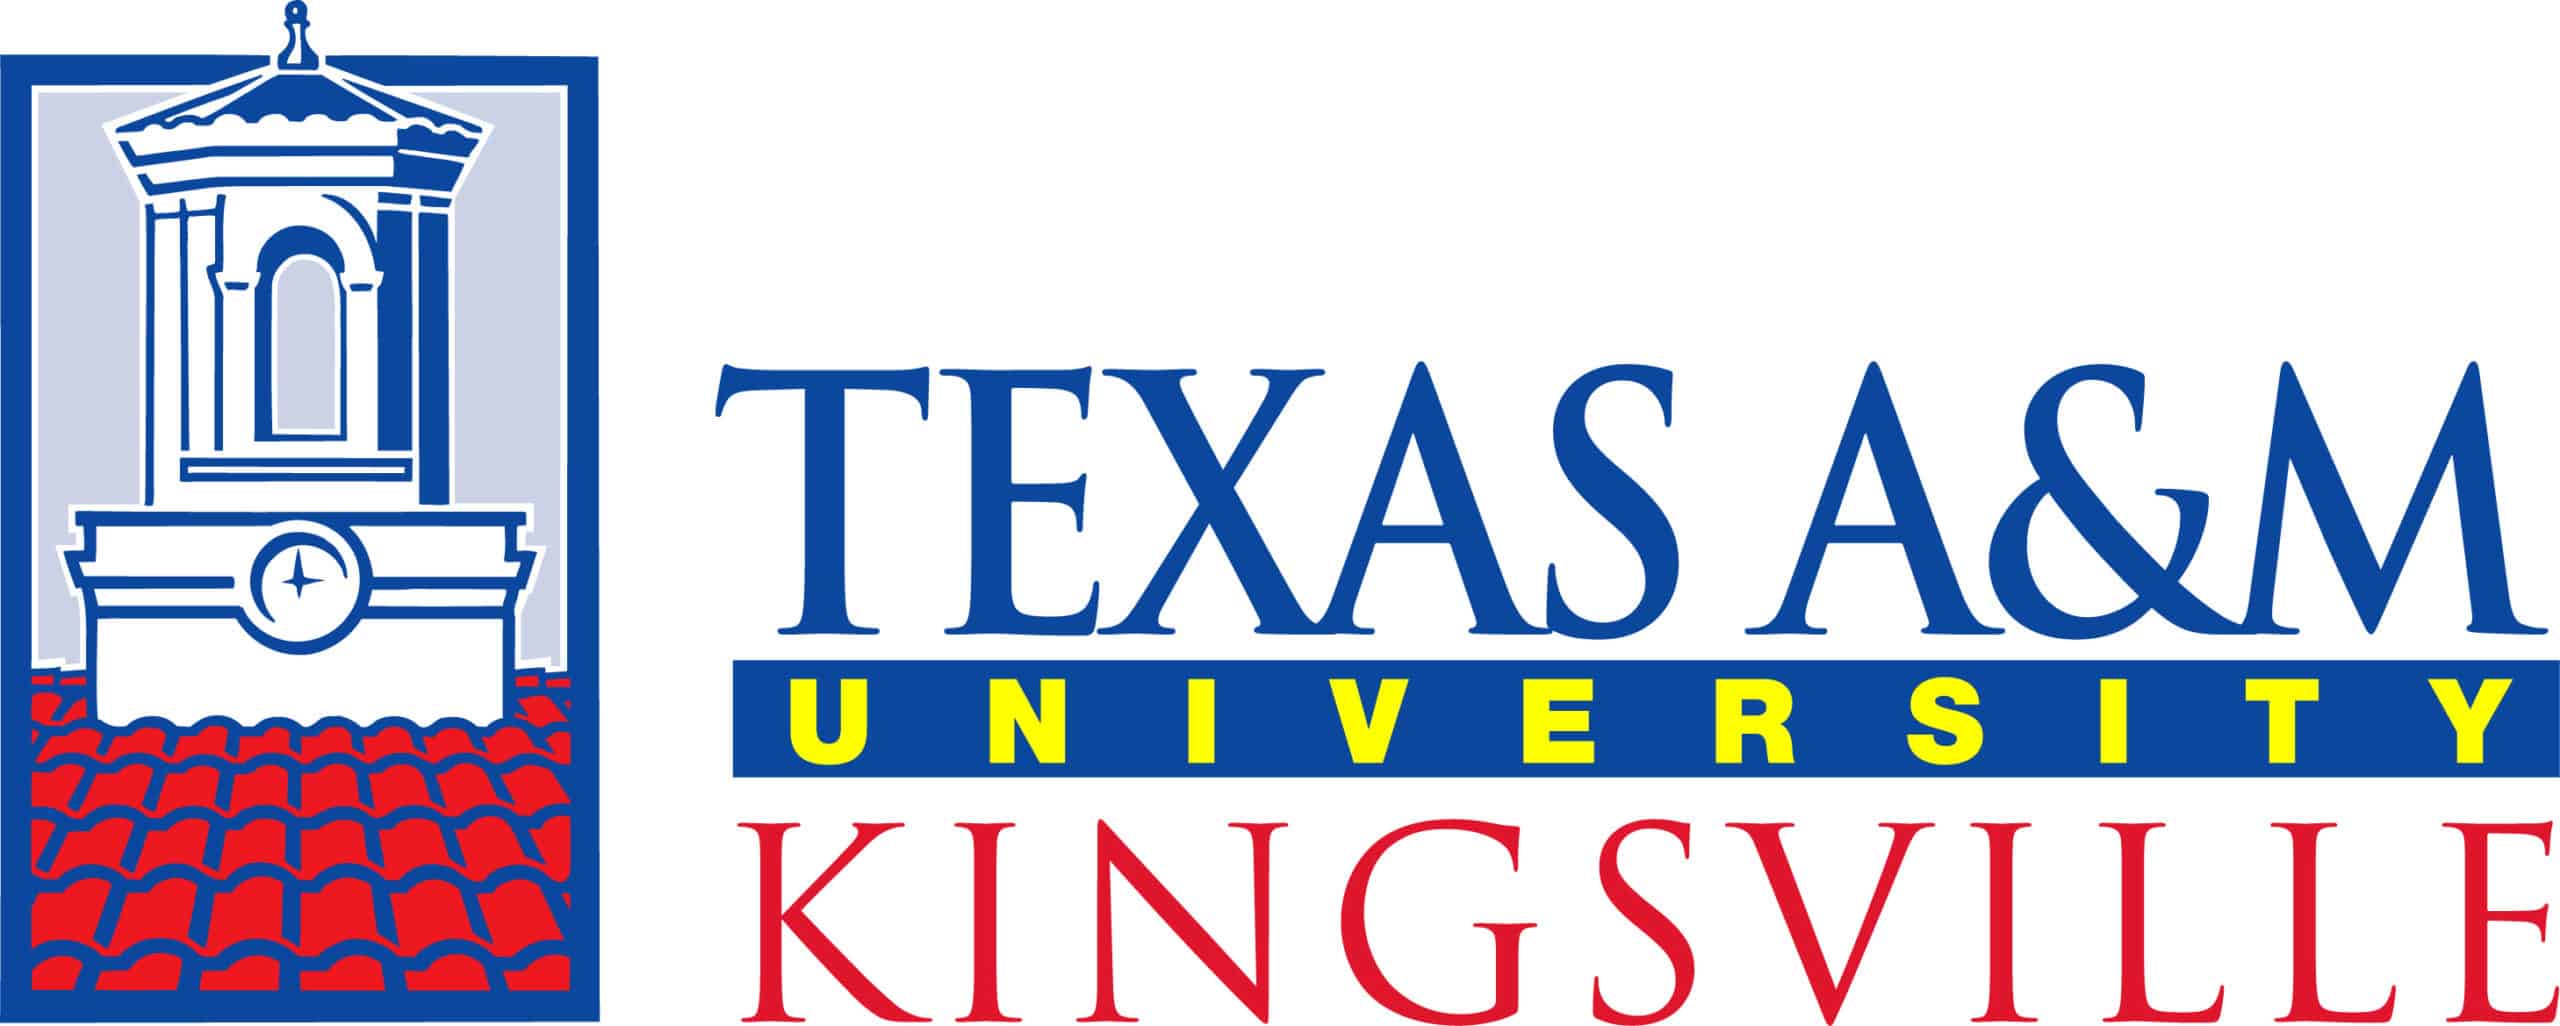 Texas A&M UniversityKingsville College of Business Administration